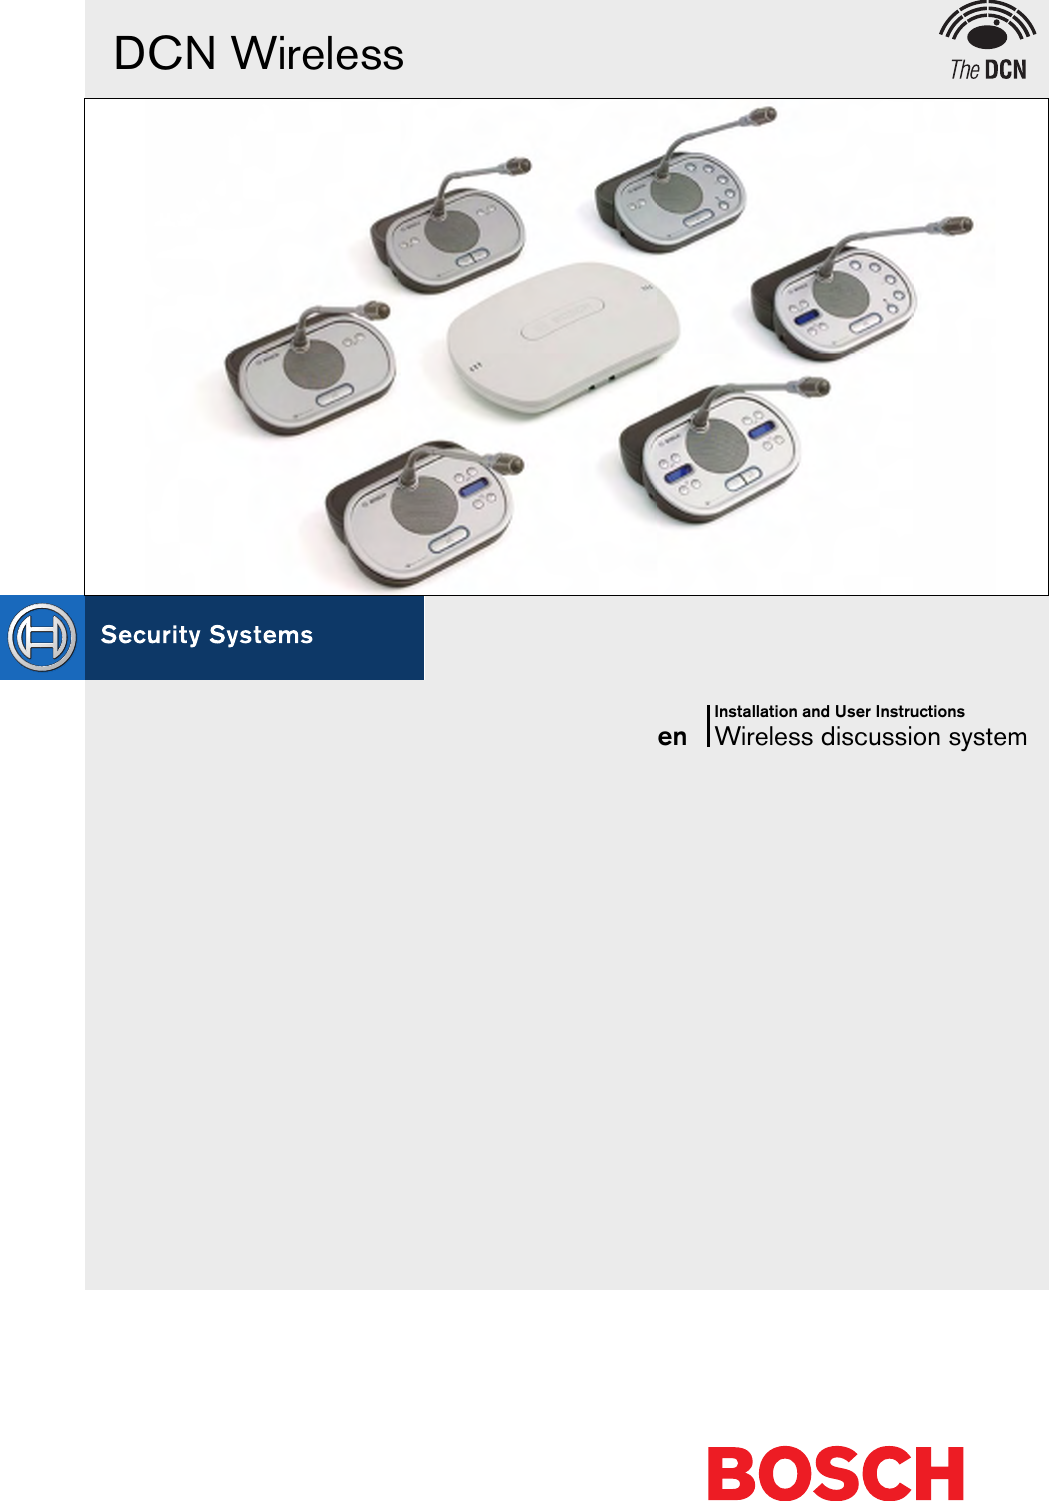 Installation and User InstructionsWireless discussion systemenDCN Wireless